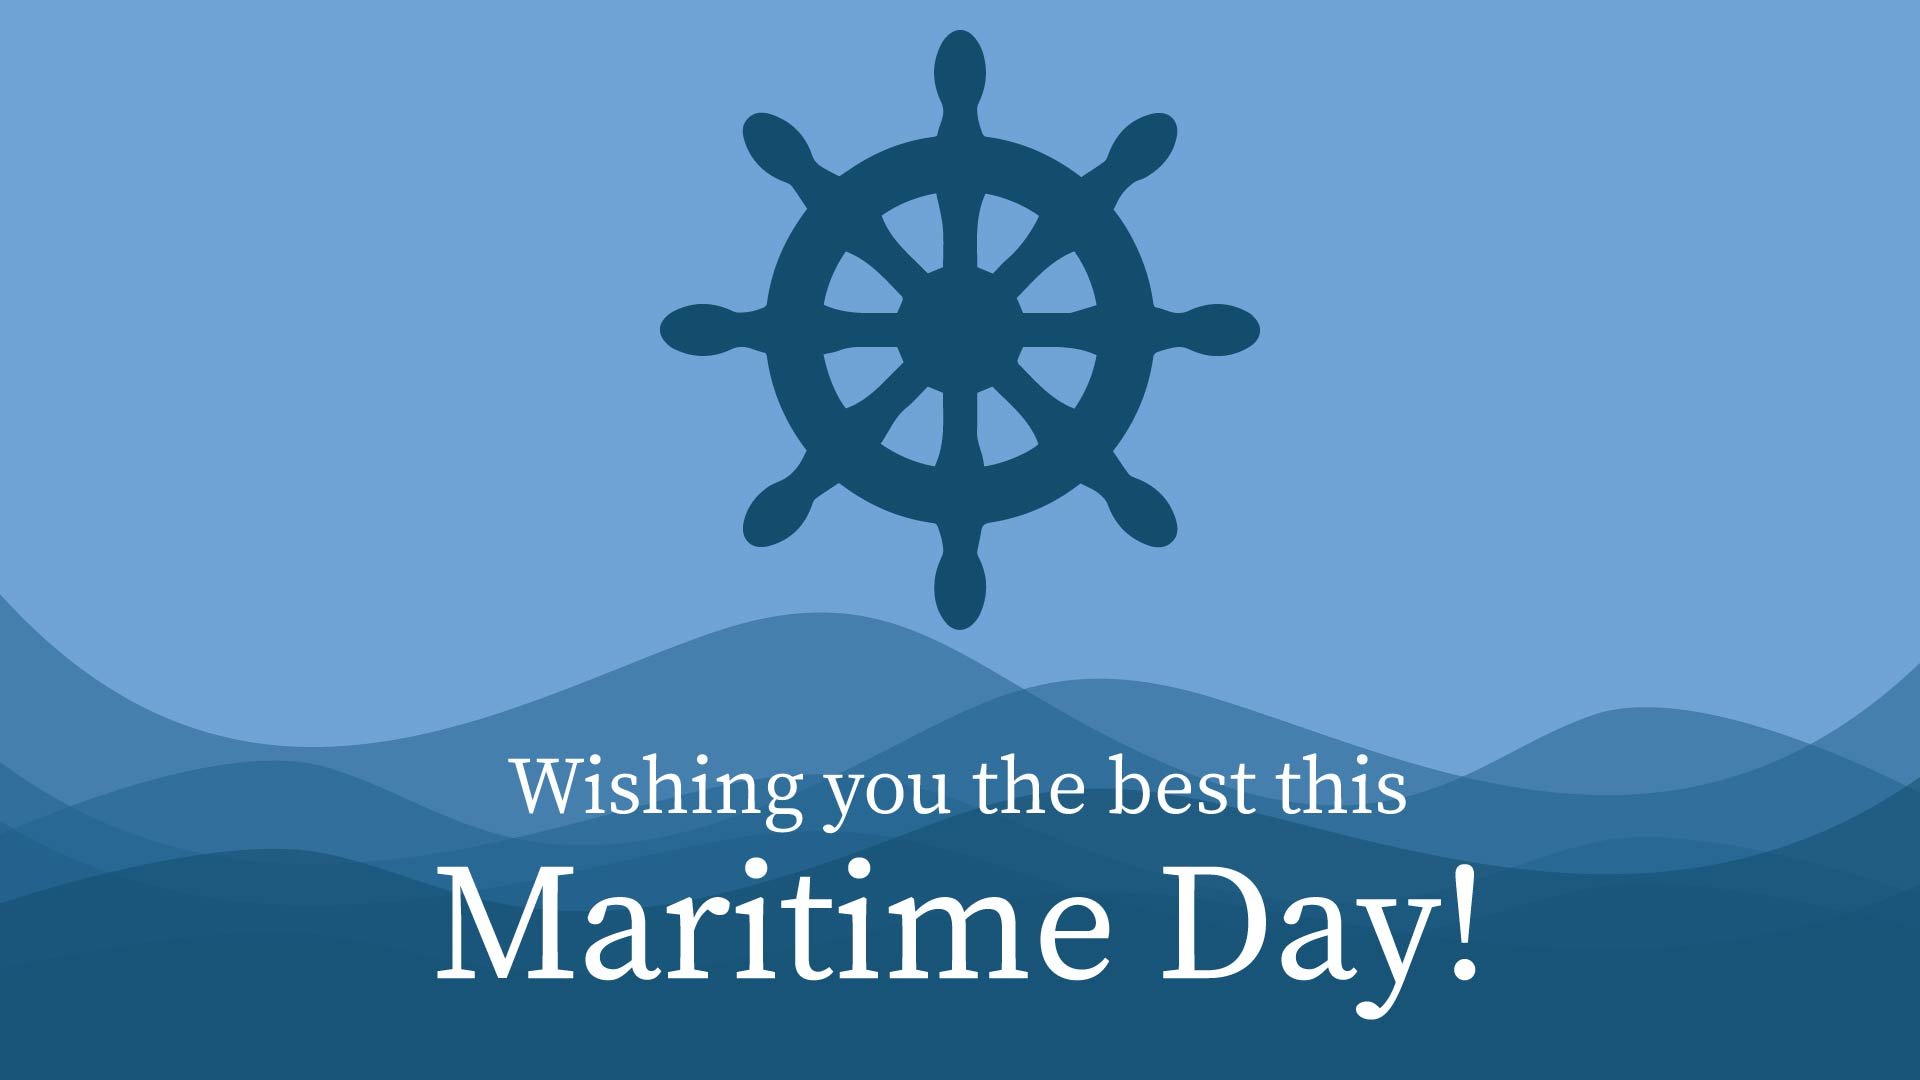 National Maritime Day Wishes Background